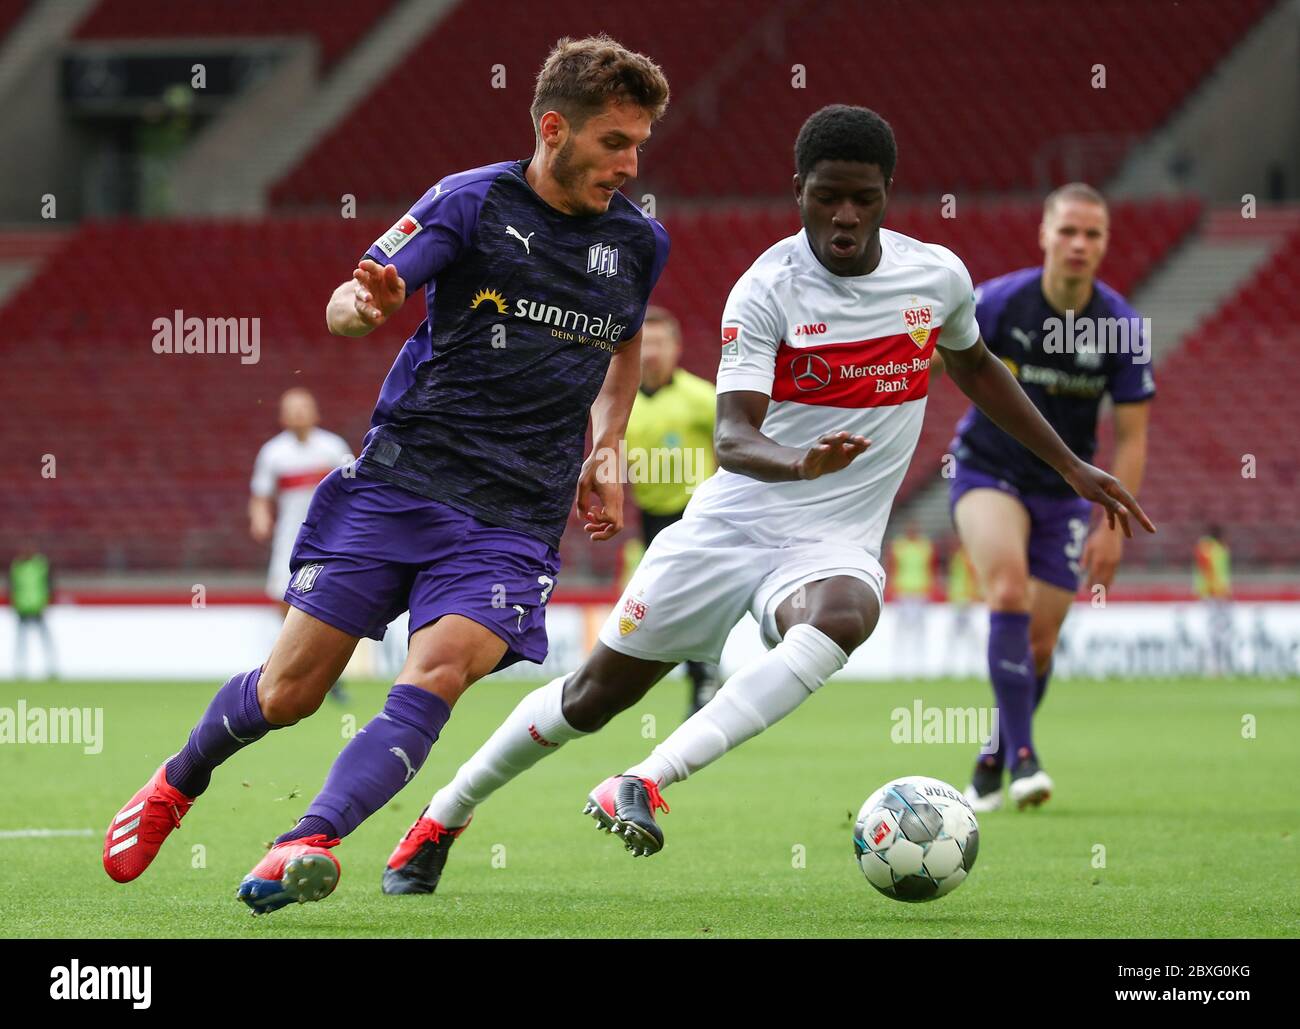 Stuttgart, Germany. 07th June, 2020. Football: 2nd Bundesliga, VfB Stuttgart - VfL Osnabrück, 30th matchday in the Mercedes-Benz Arena. Osnabrück's Bashkim Ajdini in action with Clinton Mola (r) of Stuttgart. IMPORTANT NOTICE: In accordance with the regulations of the DFL Deutsche Fußball Liga and the DFB Deutscher Fußball-Bund, it is prohibited to exploit or have exploited in the stadium and/or from the game taken photographs in the form of sequence images and/or video-like photo series. Credit: Tom Weller/dpa-Pool/dpa/Alamy Live News Stock Photo